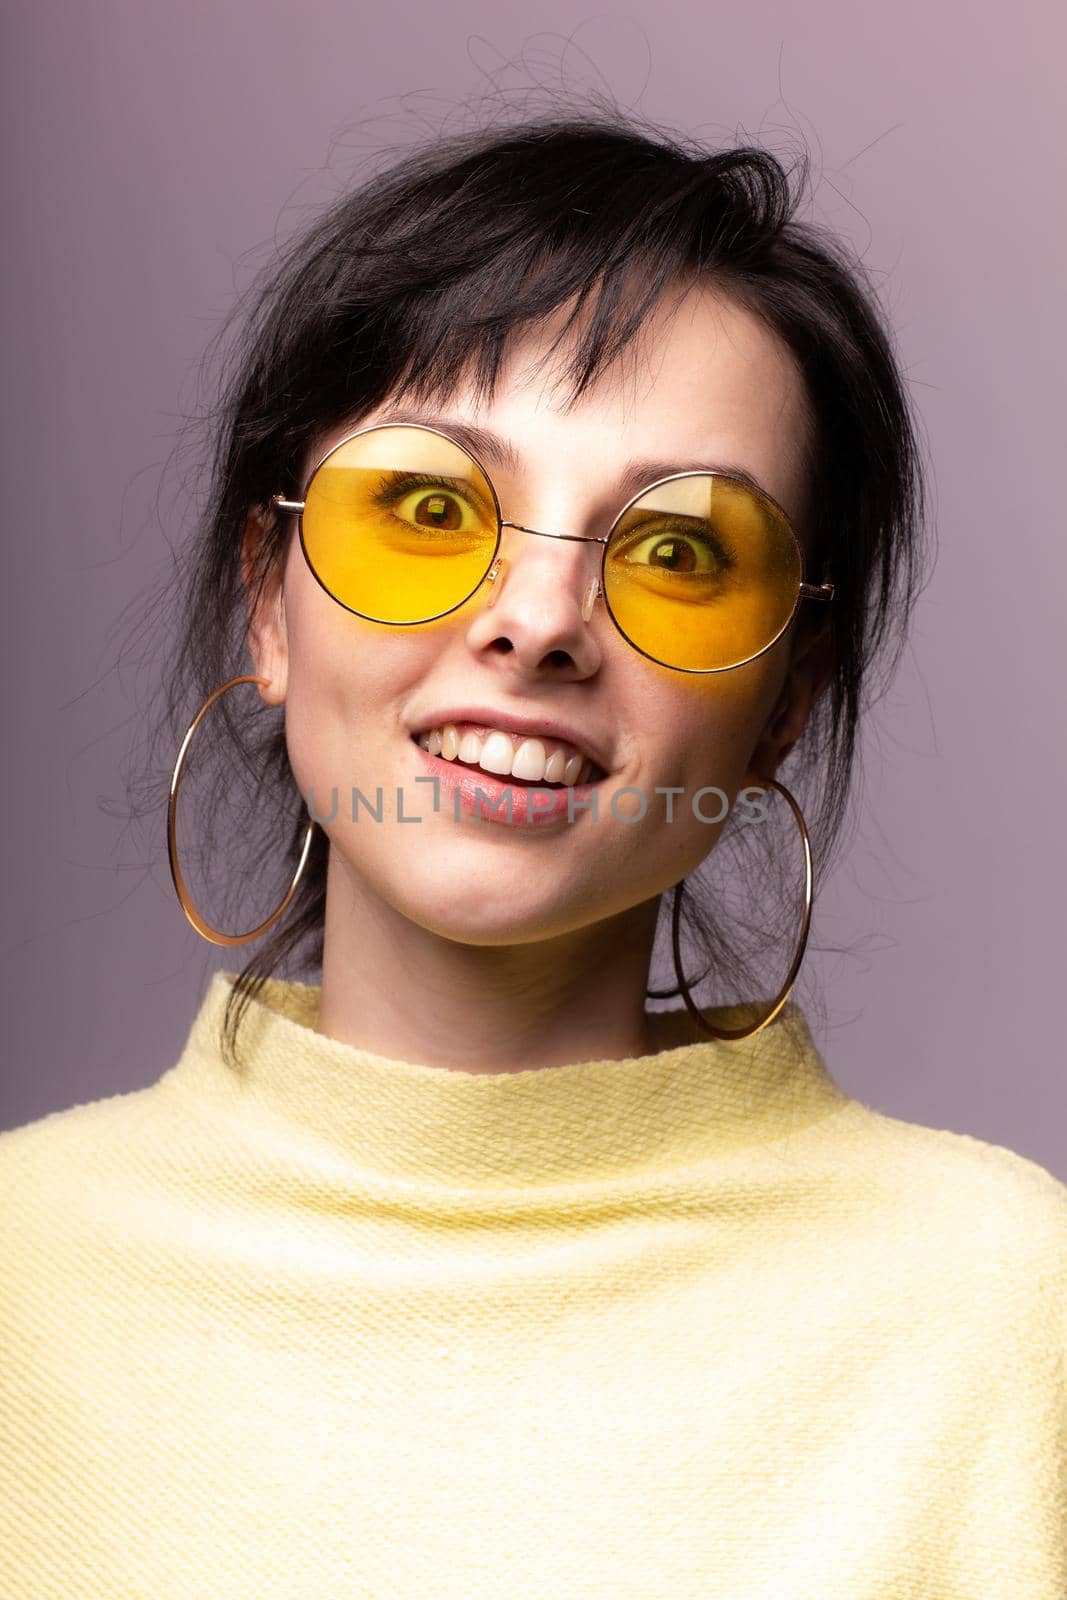 brunette woman in yellow glasses and yellow sweater, close-up portrait by shilovskaya